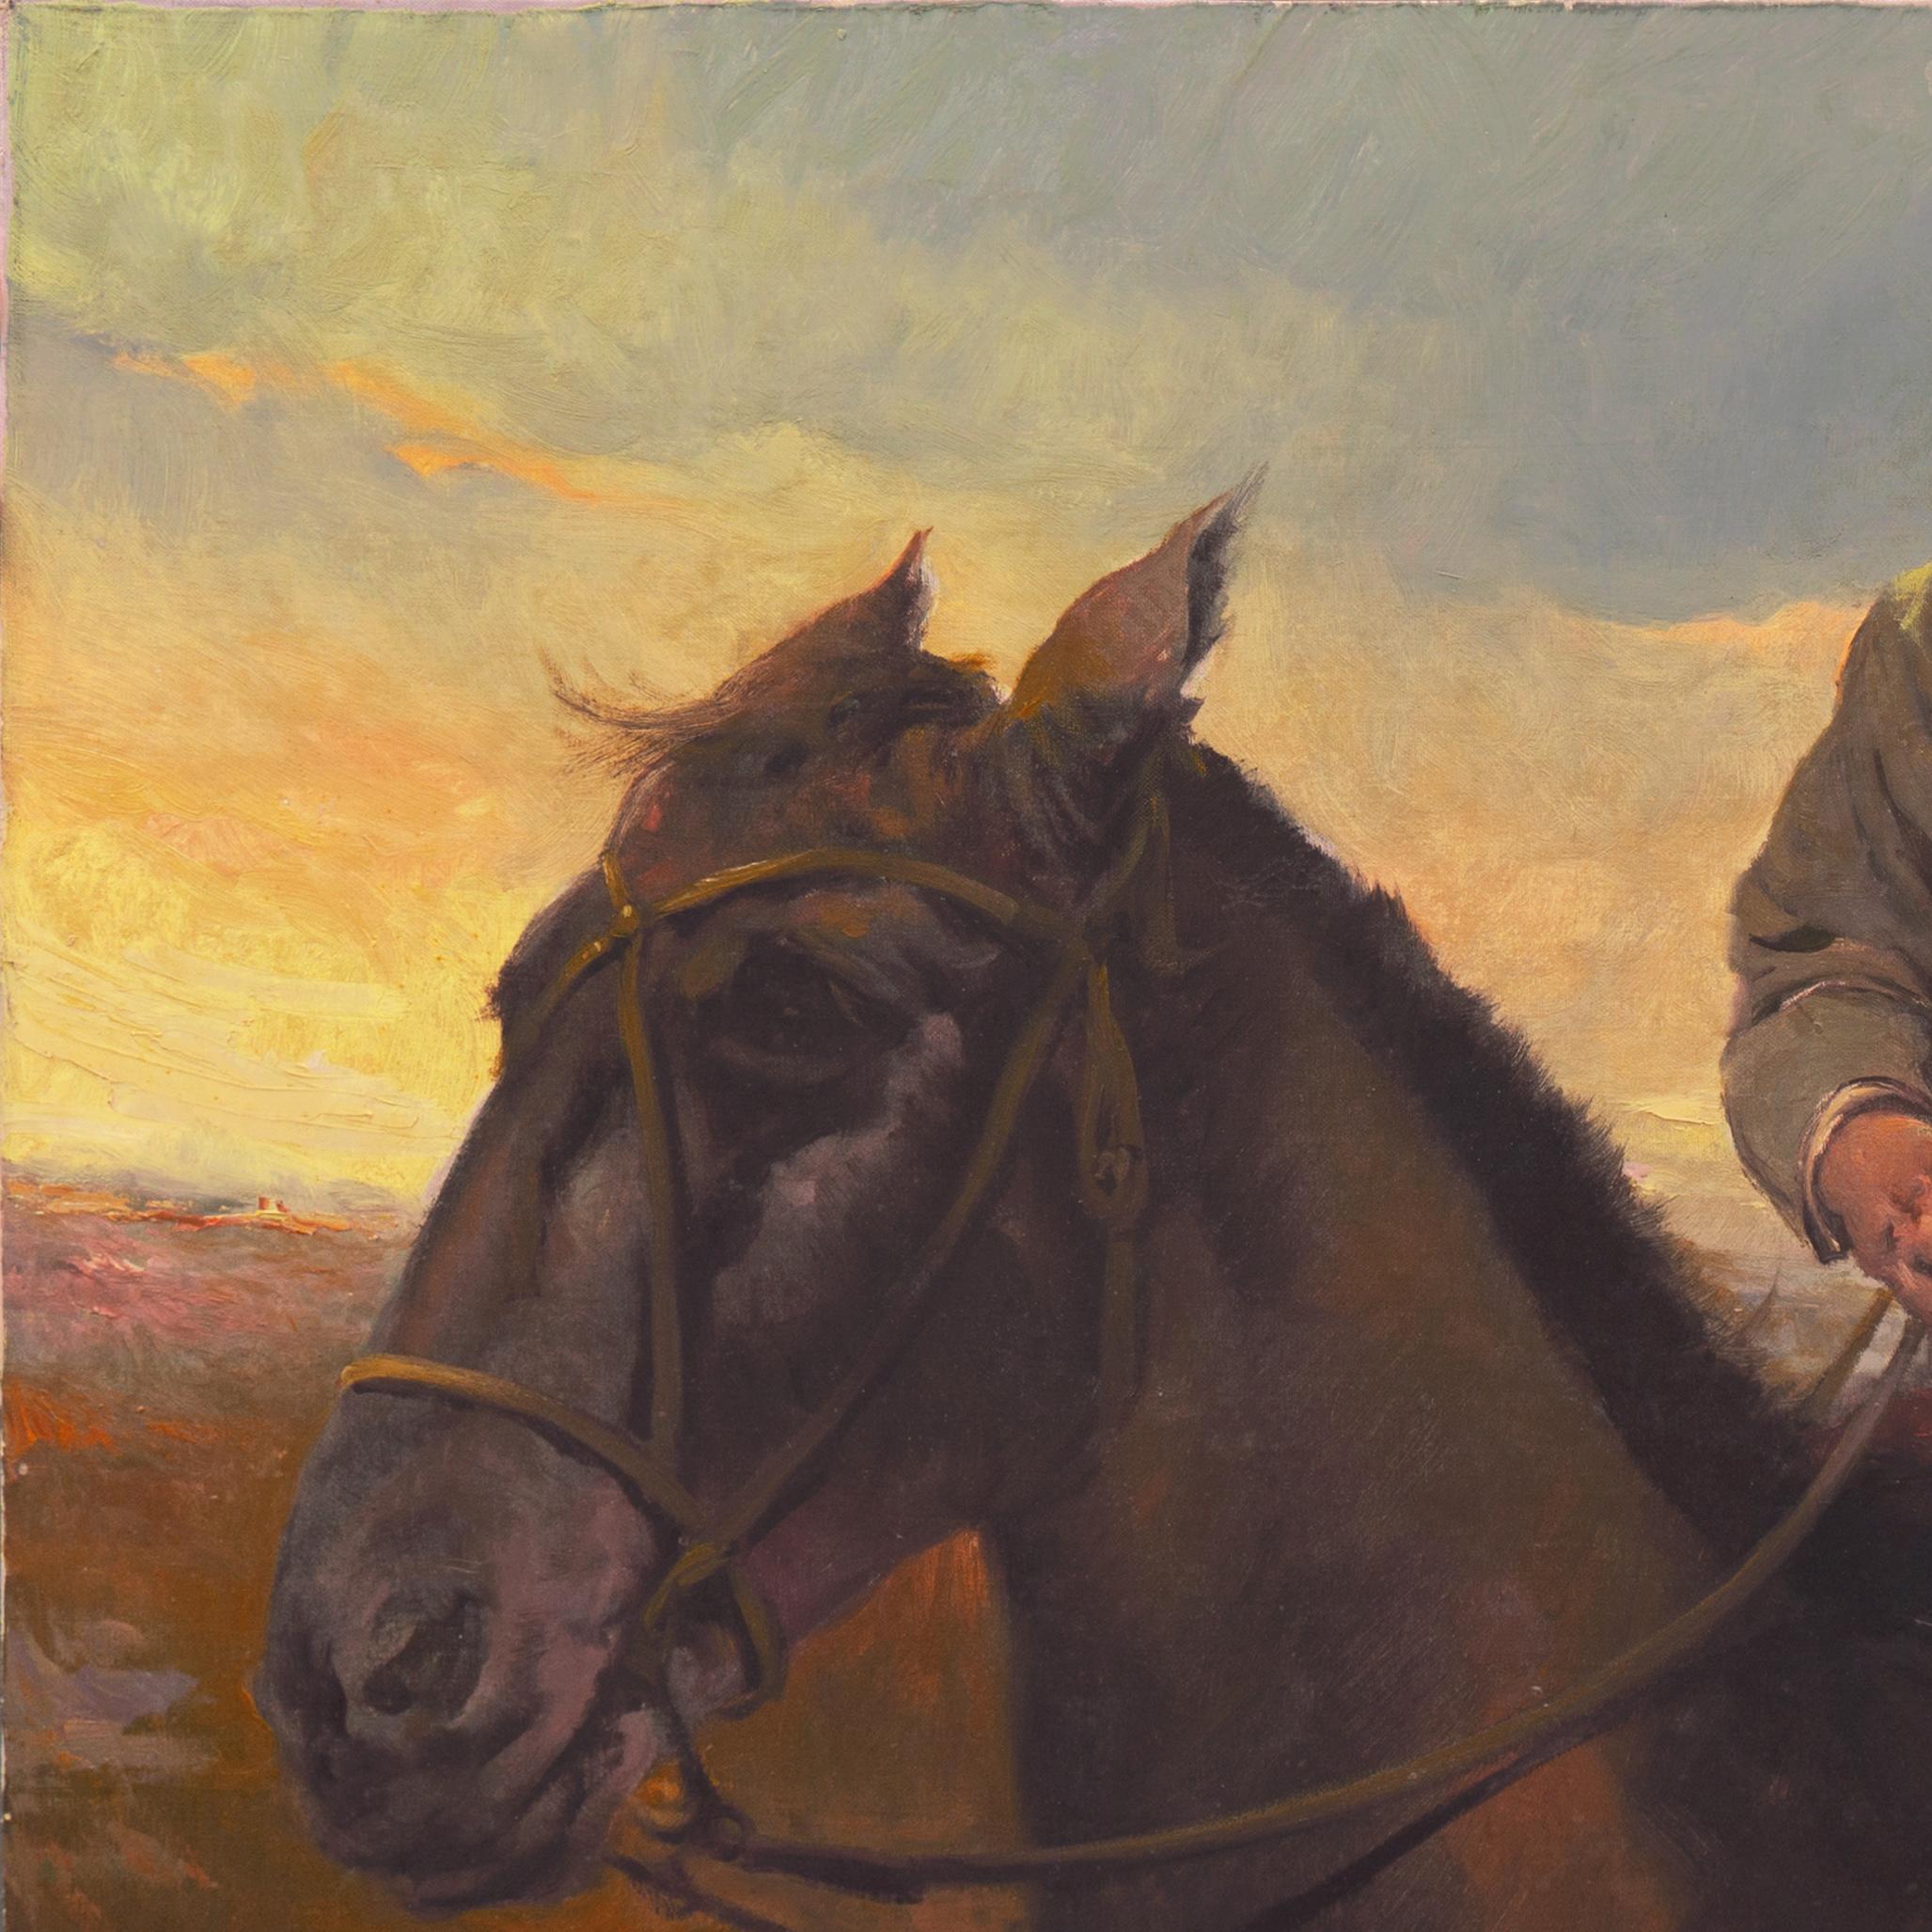 'Gaucho on a Criollo', Argentine Sunset, Pampas, Equestrian Study, Horse, Pony - Black Figurative Painting by Morando Luque